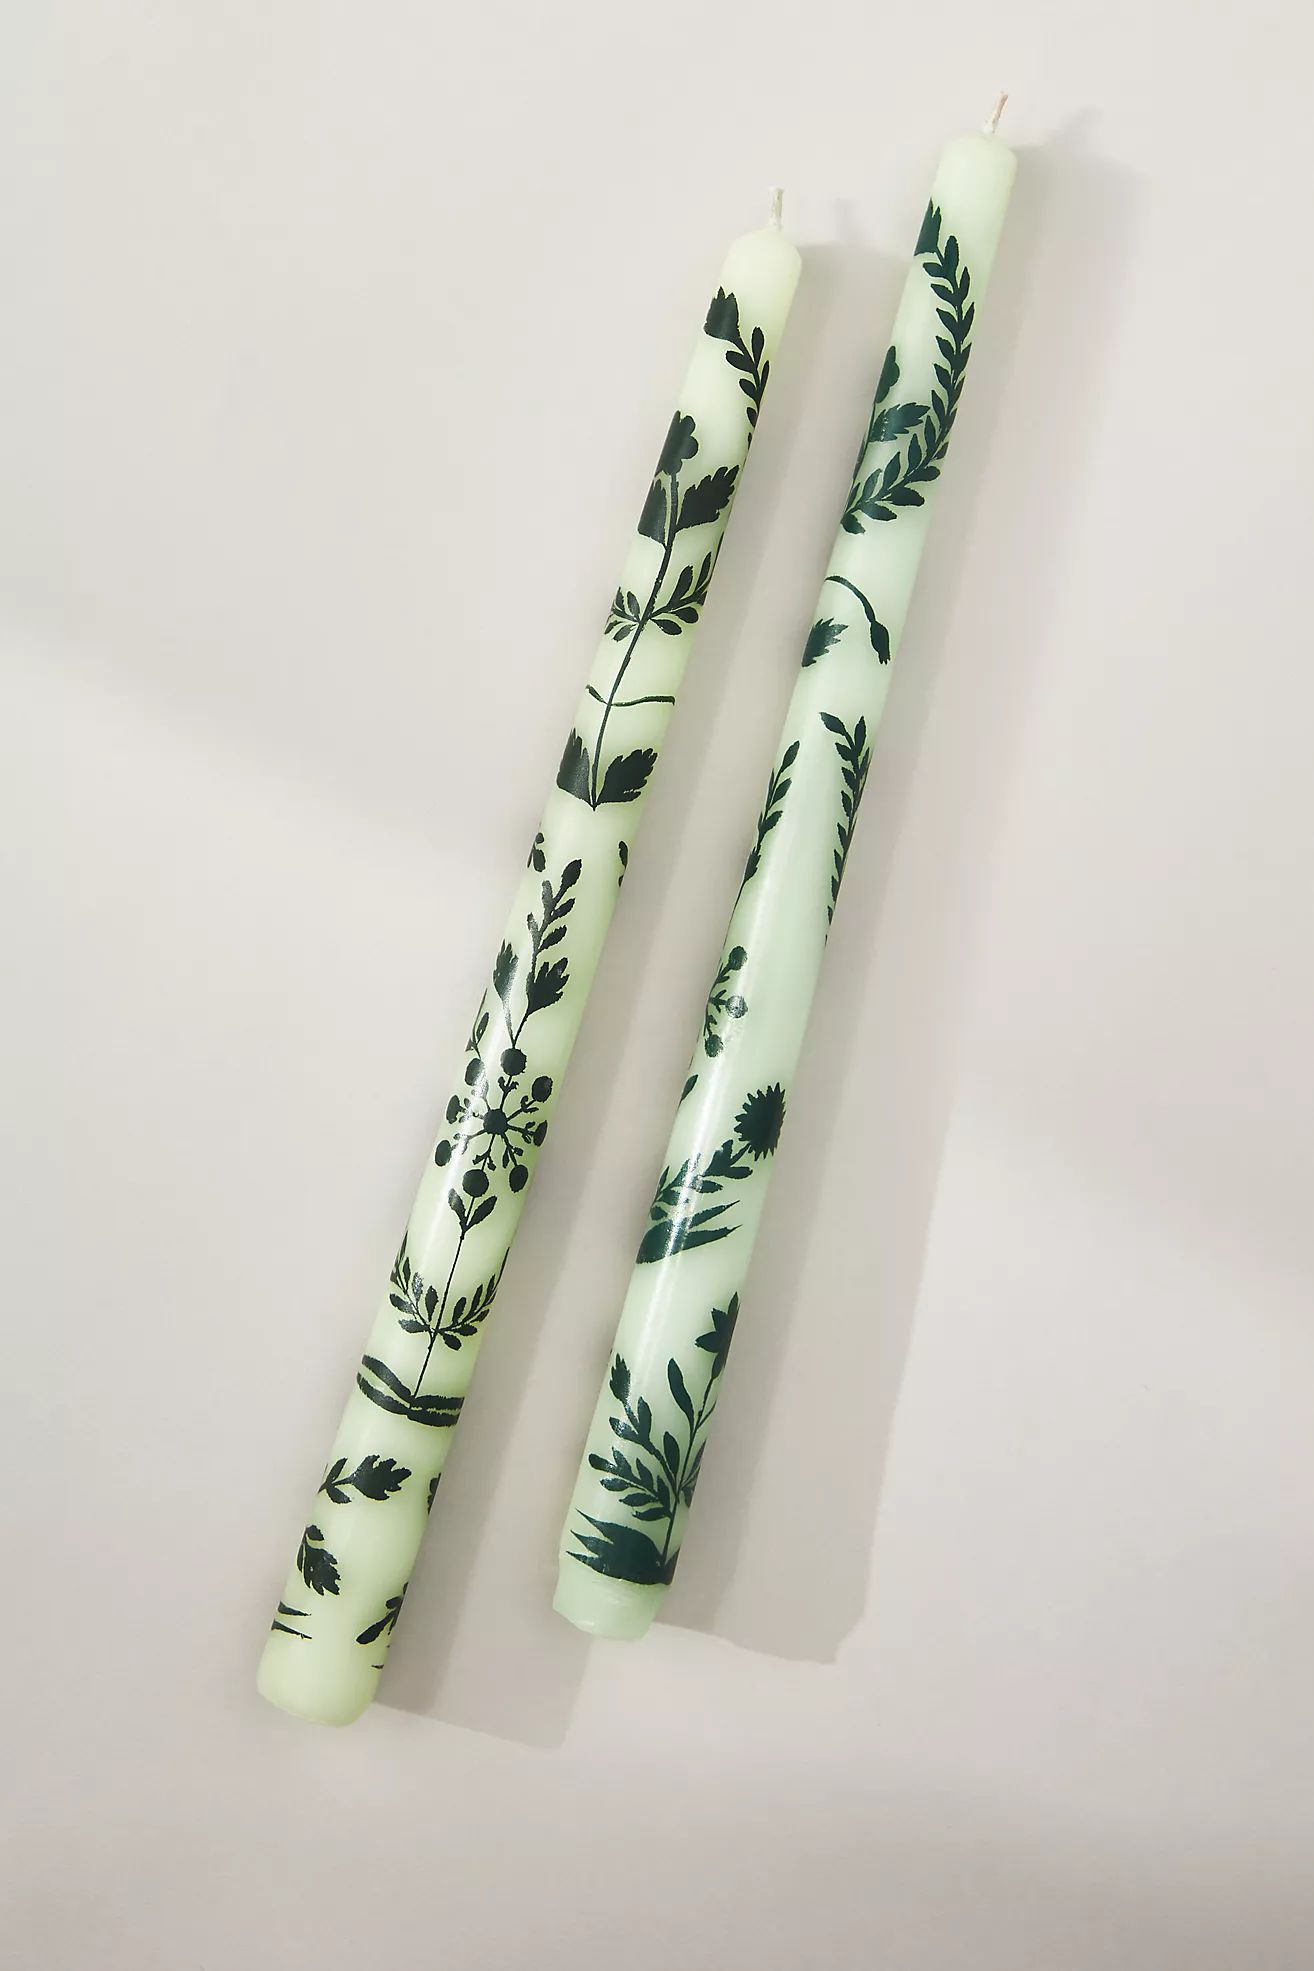 Ananda Handpainted Taper Candles, Set of 2 | Anthropologie (US)